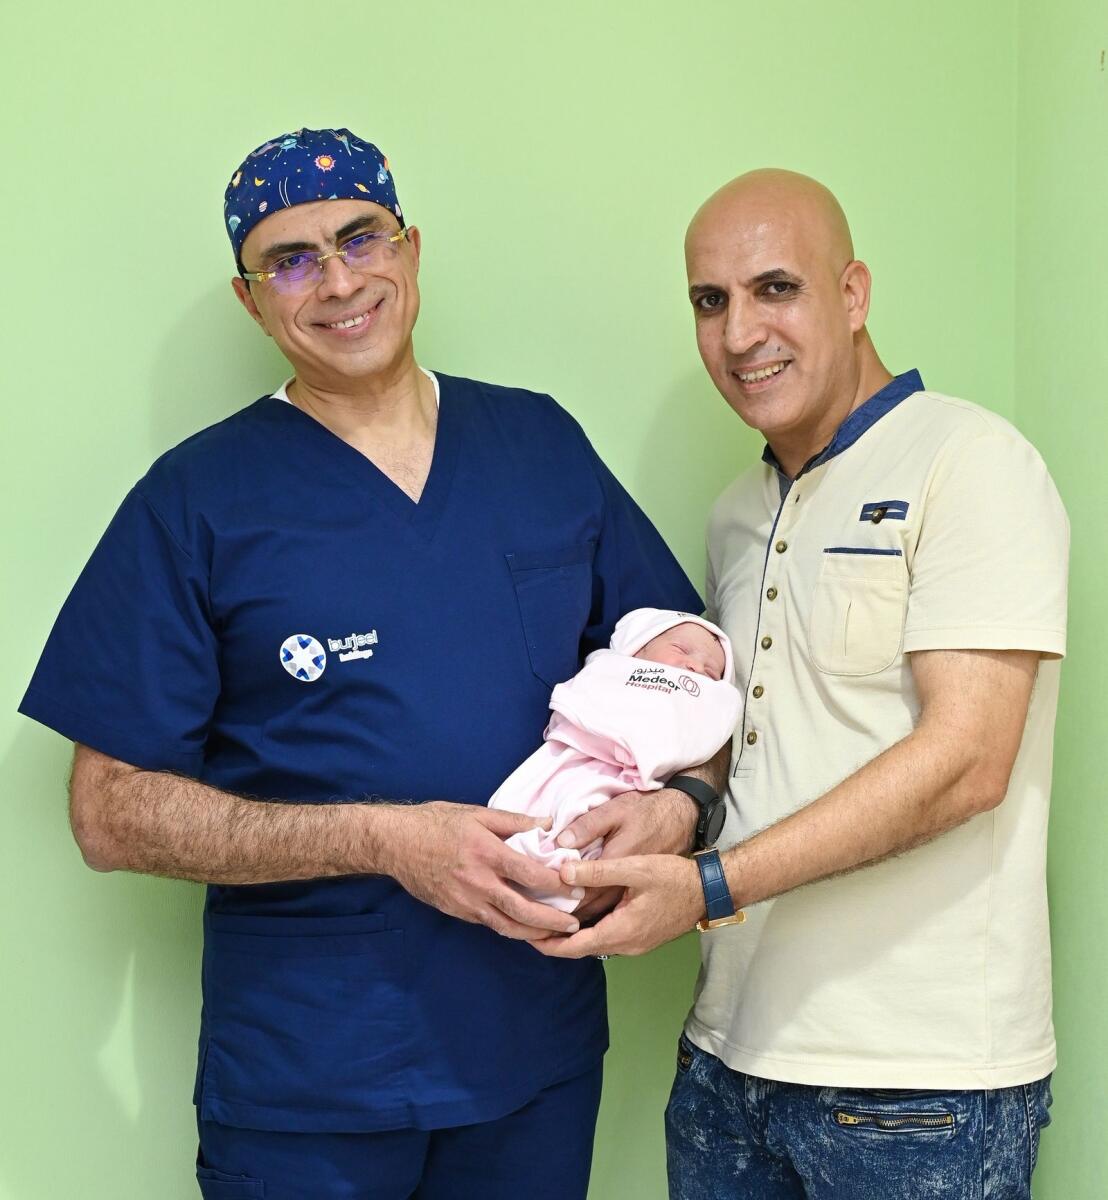 Baby Lydia with Dr Prof. Walid El Sherbiny and her father, Mohamed Abdel-aal Elsayed, at Medeor Hospital, Abu Dhabi